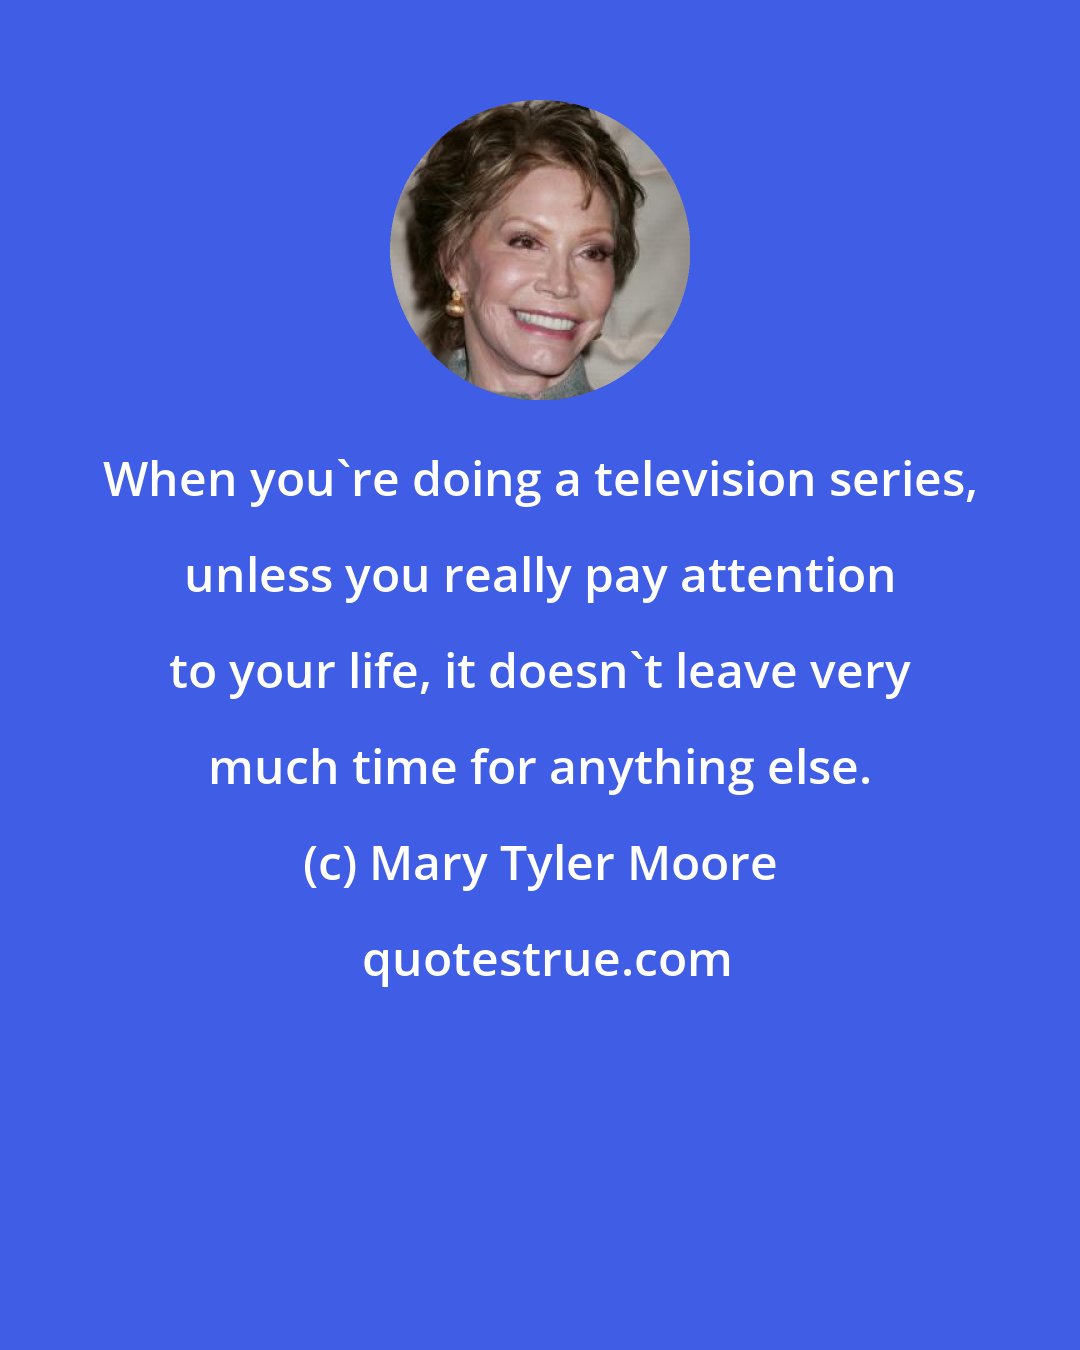 Mary Tyler Moore: When you're doing a television series, unless you really pay attention to your life, it doesn't leave very much time for anything else.